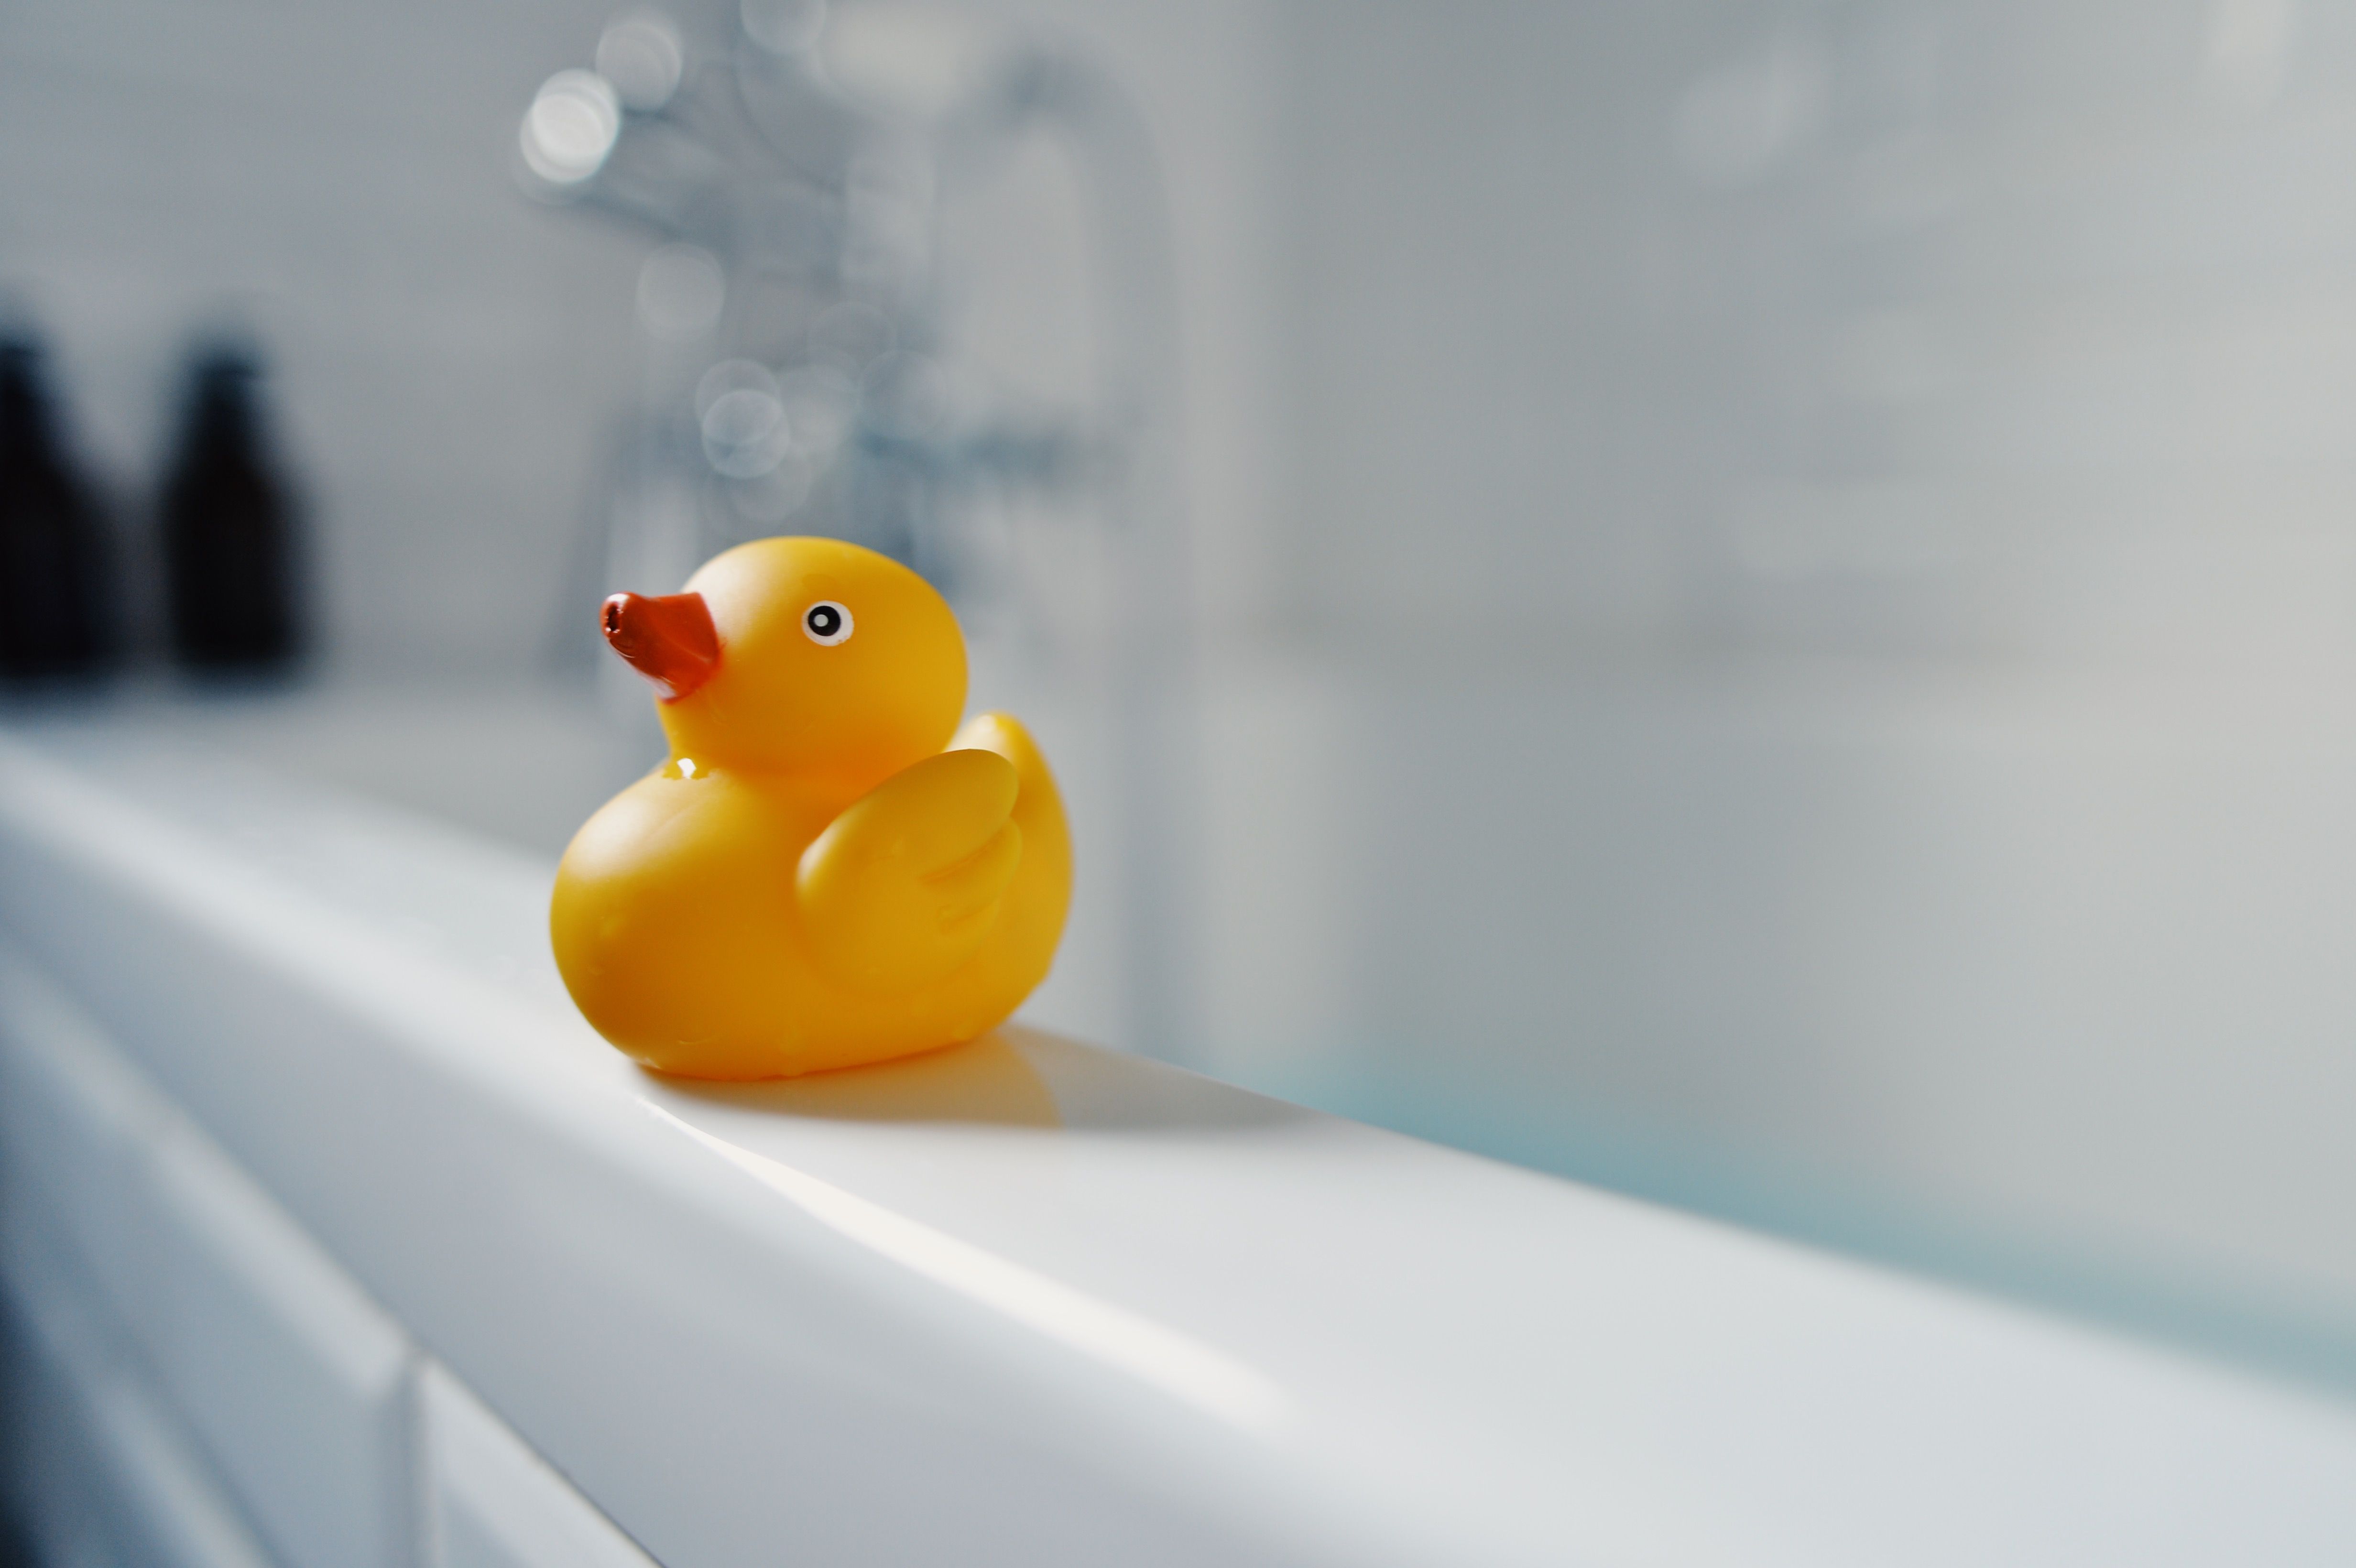 Yellow toy rubber duck by the bathtub